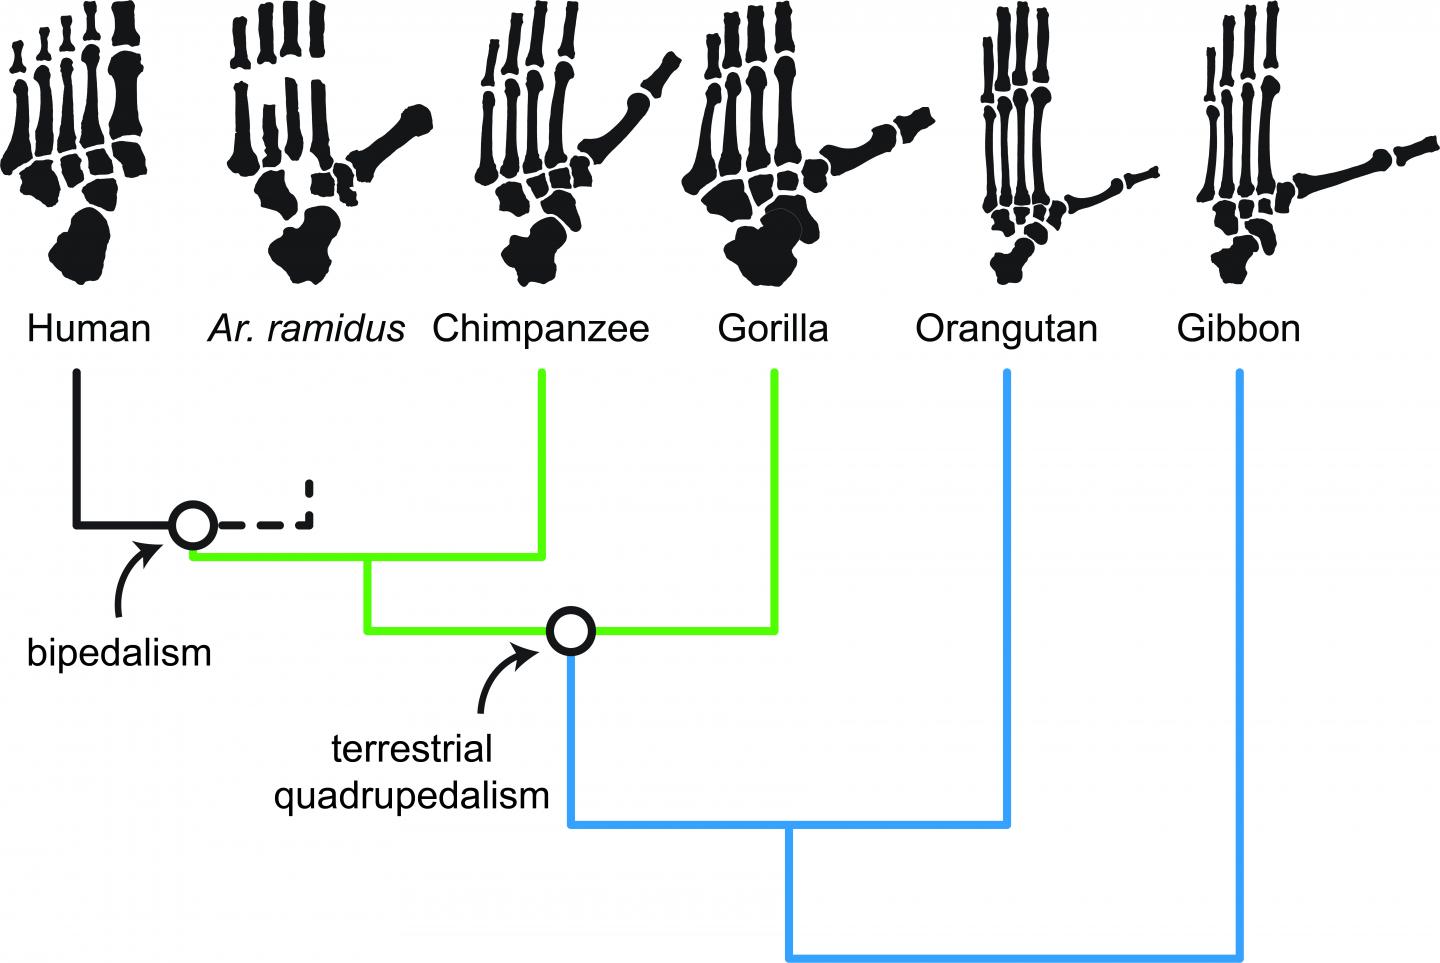 An Evolutionary Tree Depicting the Relationships Among Living Apes, Ardi, and Modern Humans